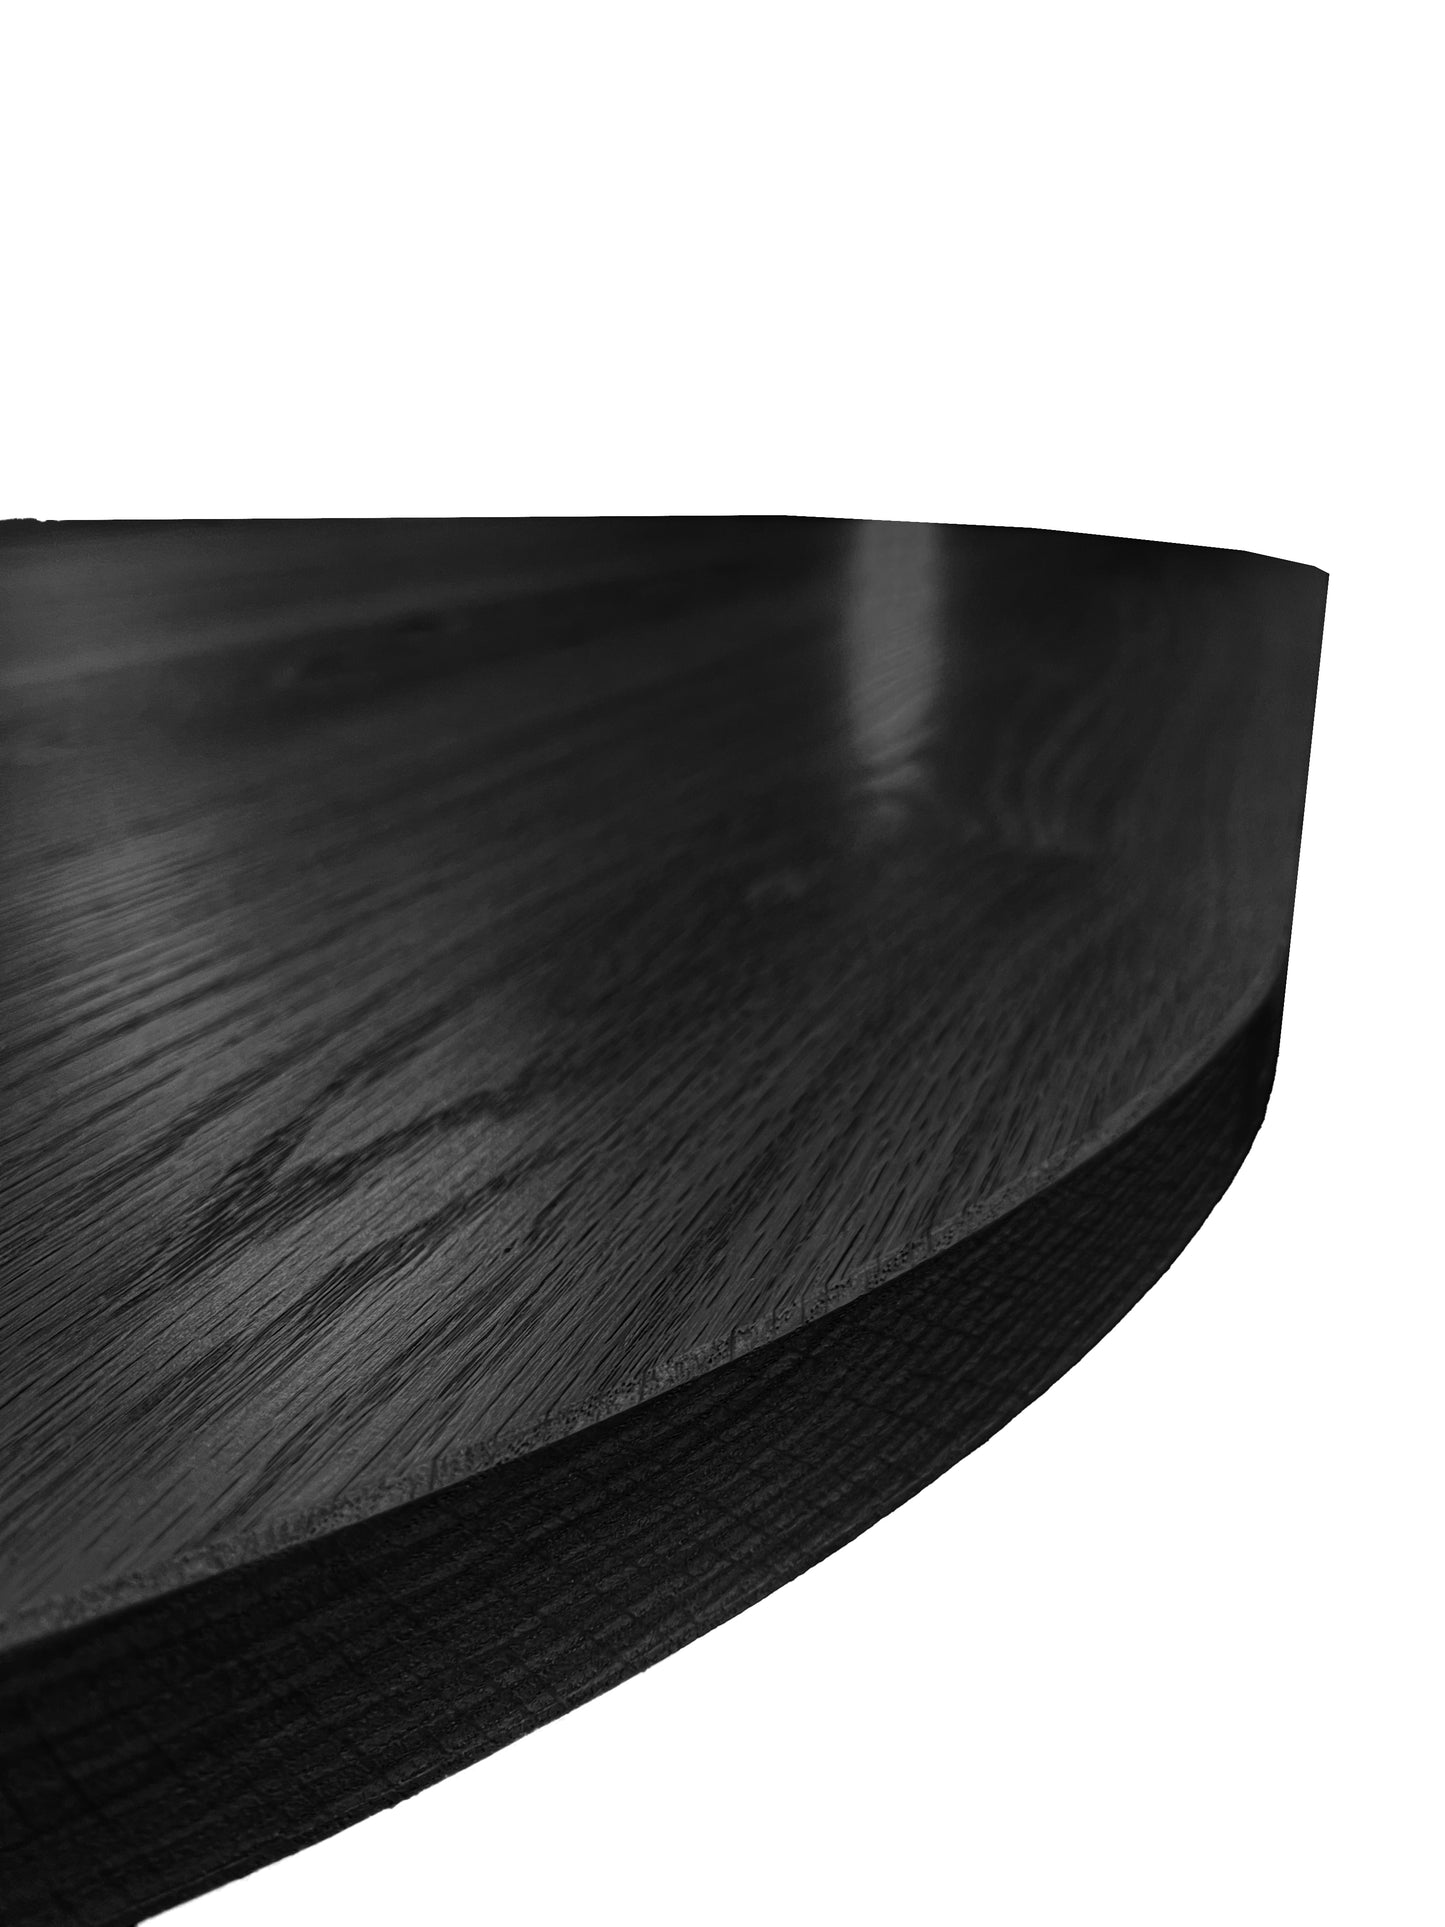 Ovail Black White Oak Conference Table